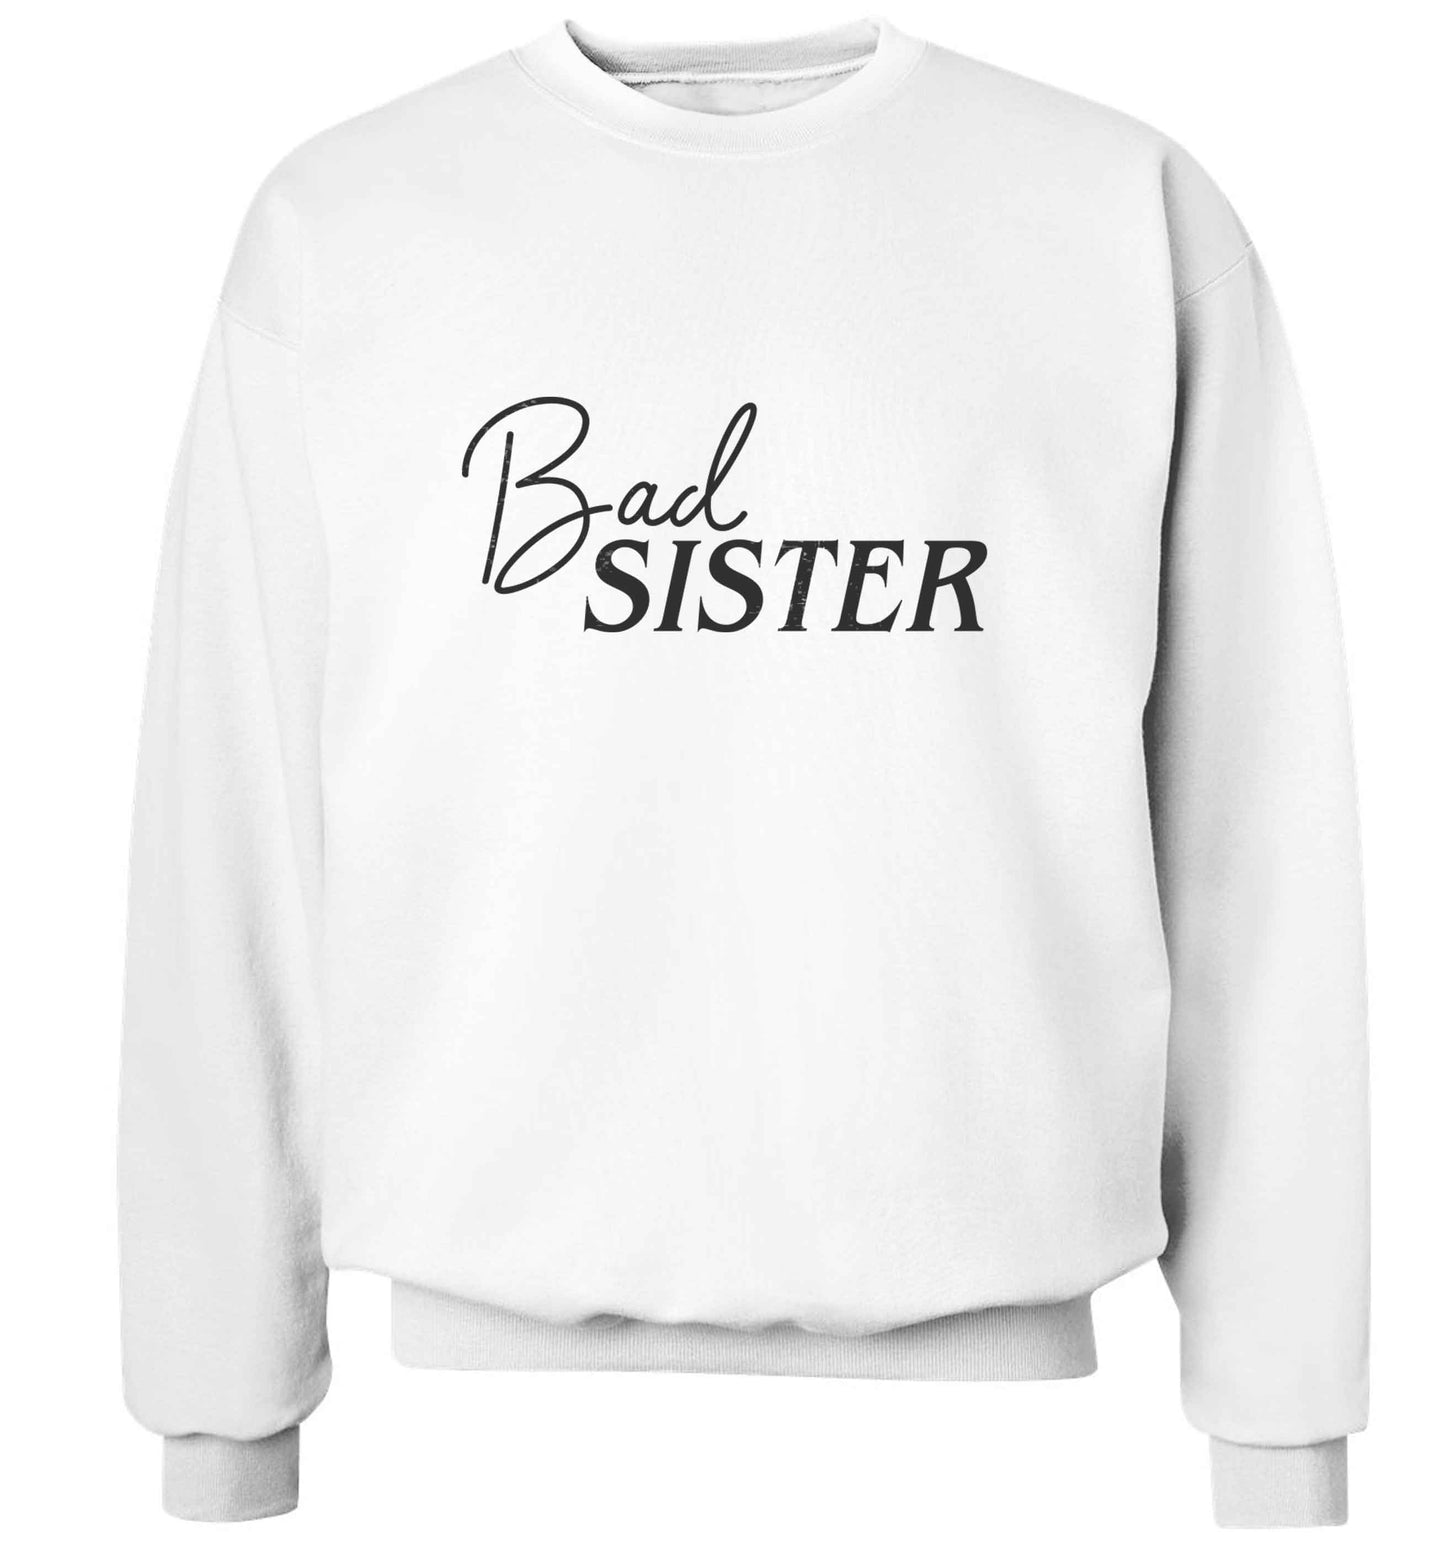 Bad sister adult's unisex white sweater 2XL